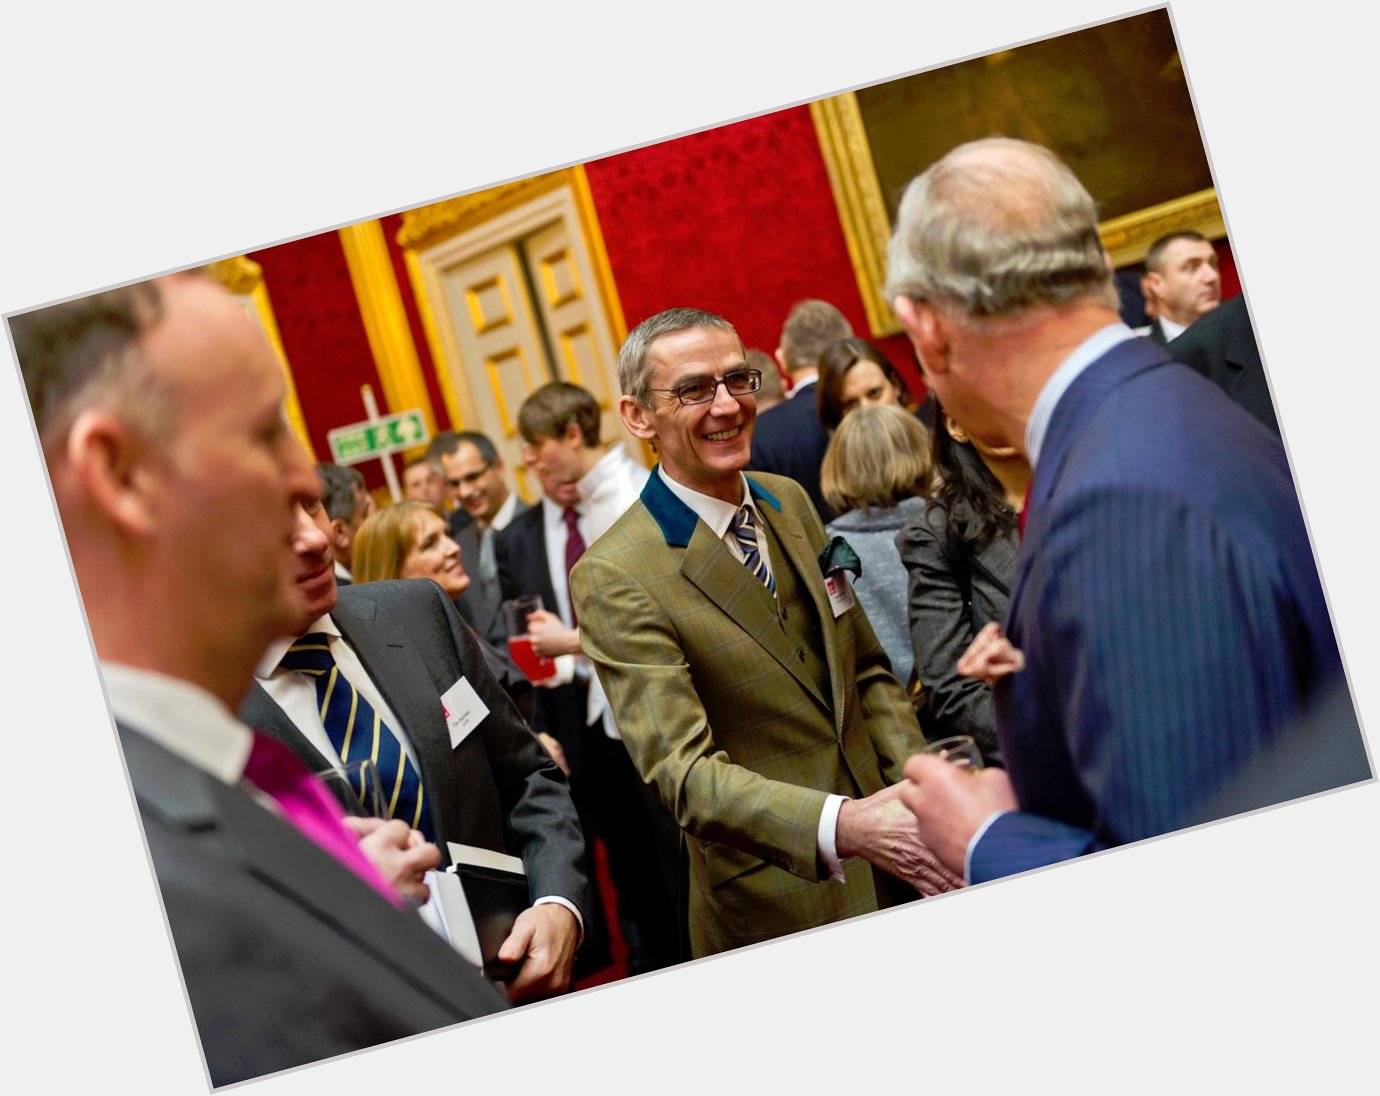 Heres a to when Stuart Seddon met Prince Charles. Happy birthday to the Prince, whos 66 today! 